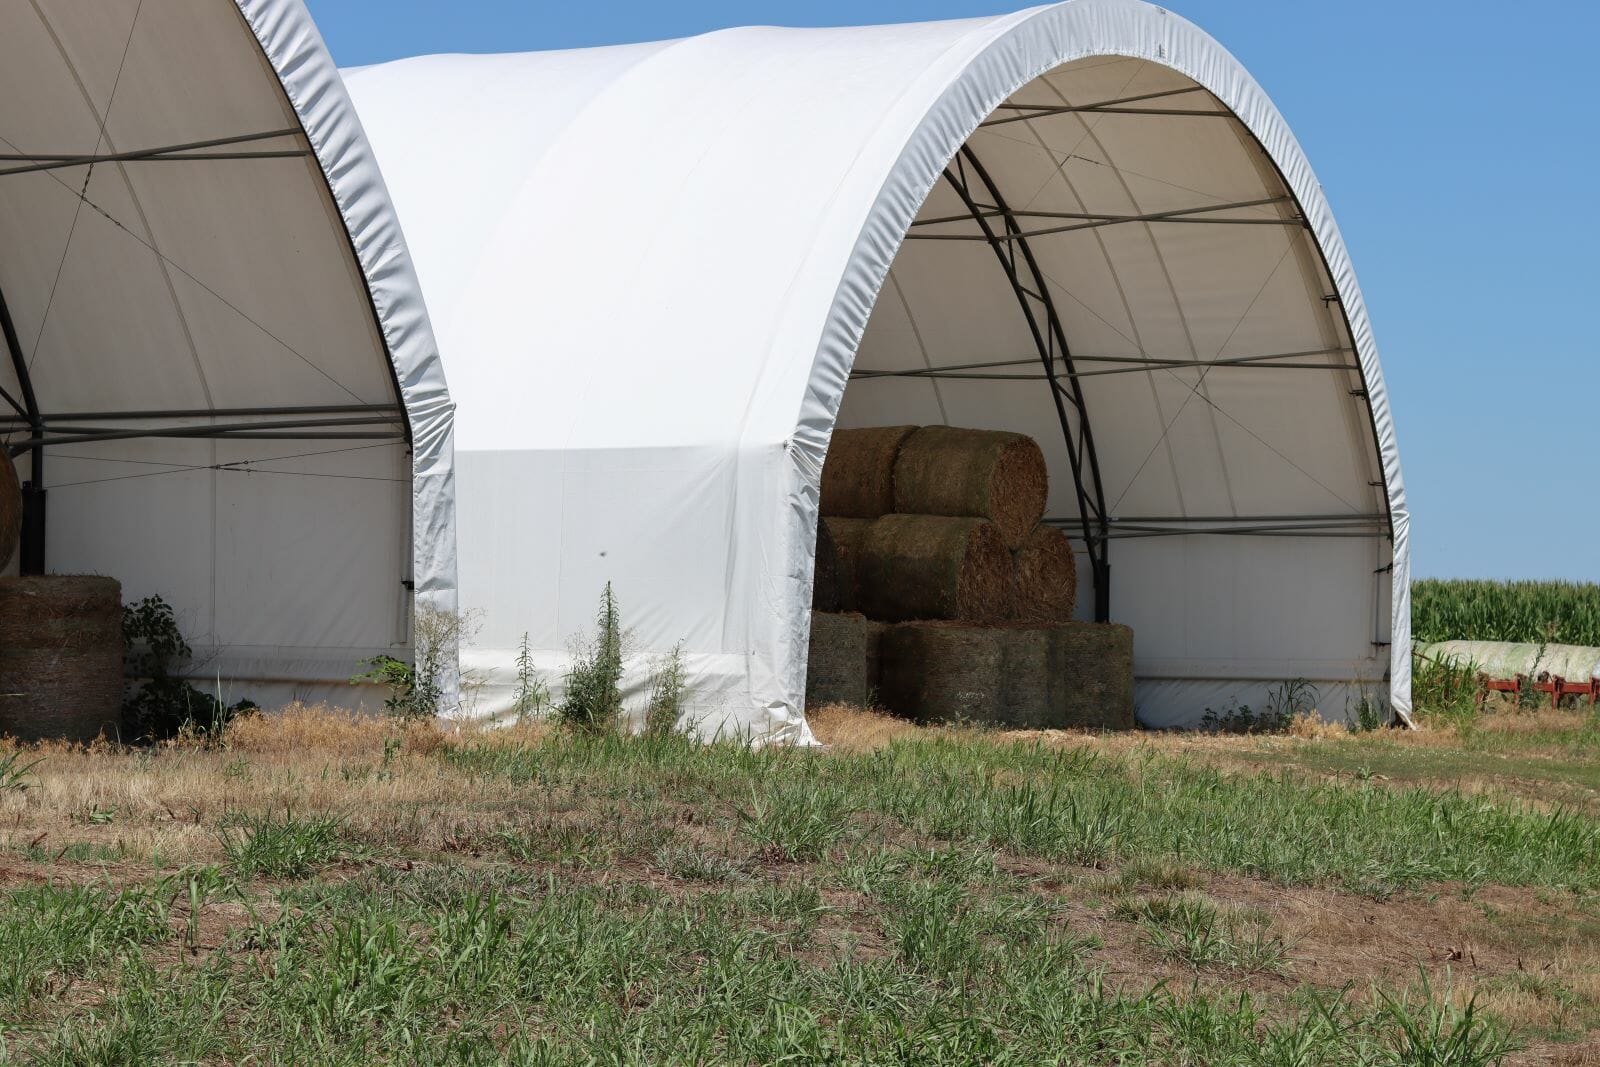 Two hoop barns covered in white tarp are filled with a small amount of round hay bales.